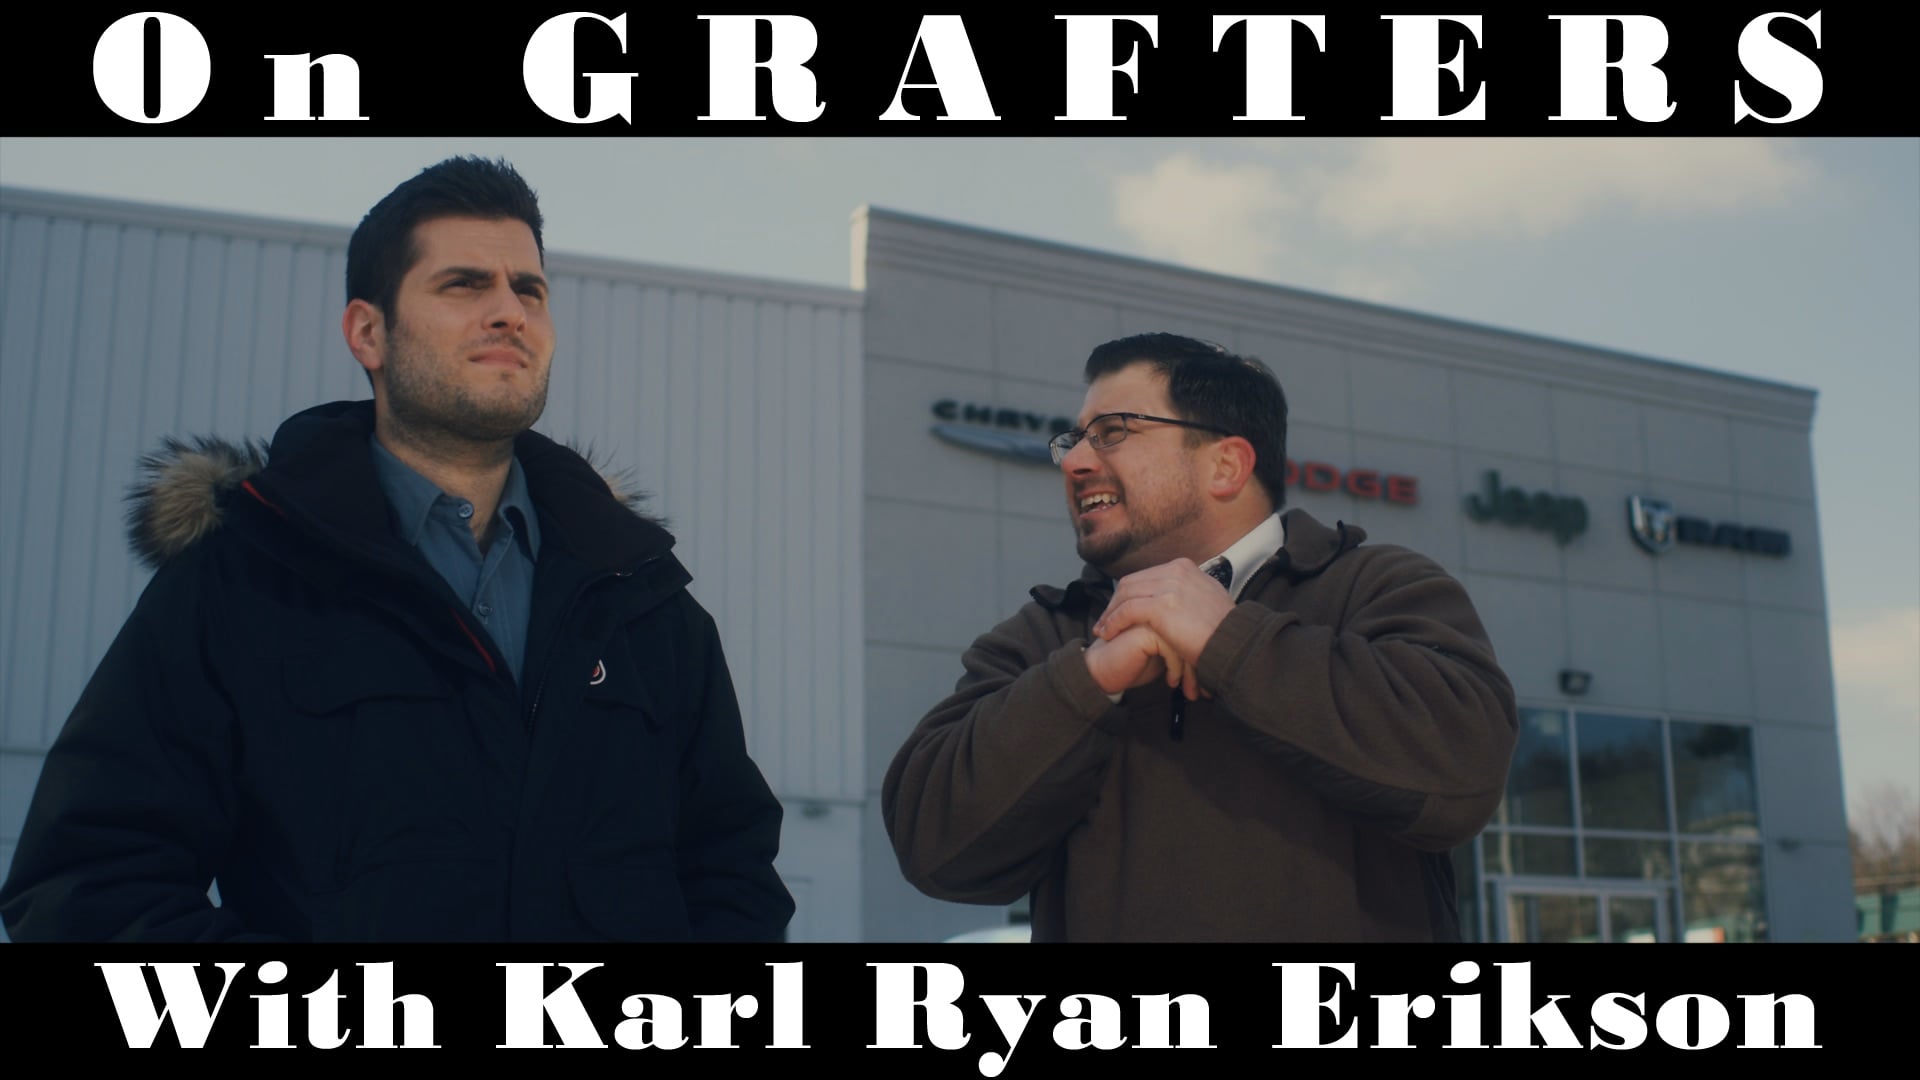 On GRAFTERS, with Karl Ryan Erikson